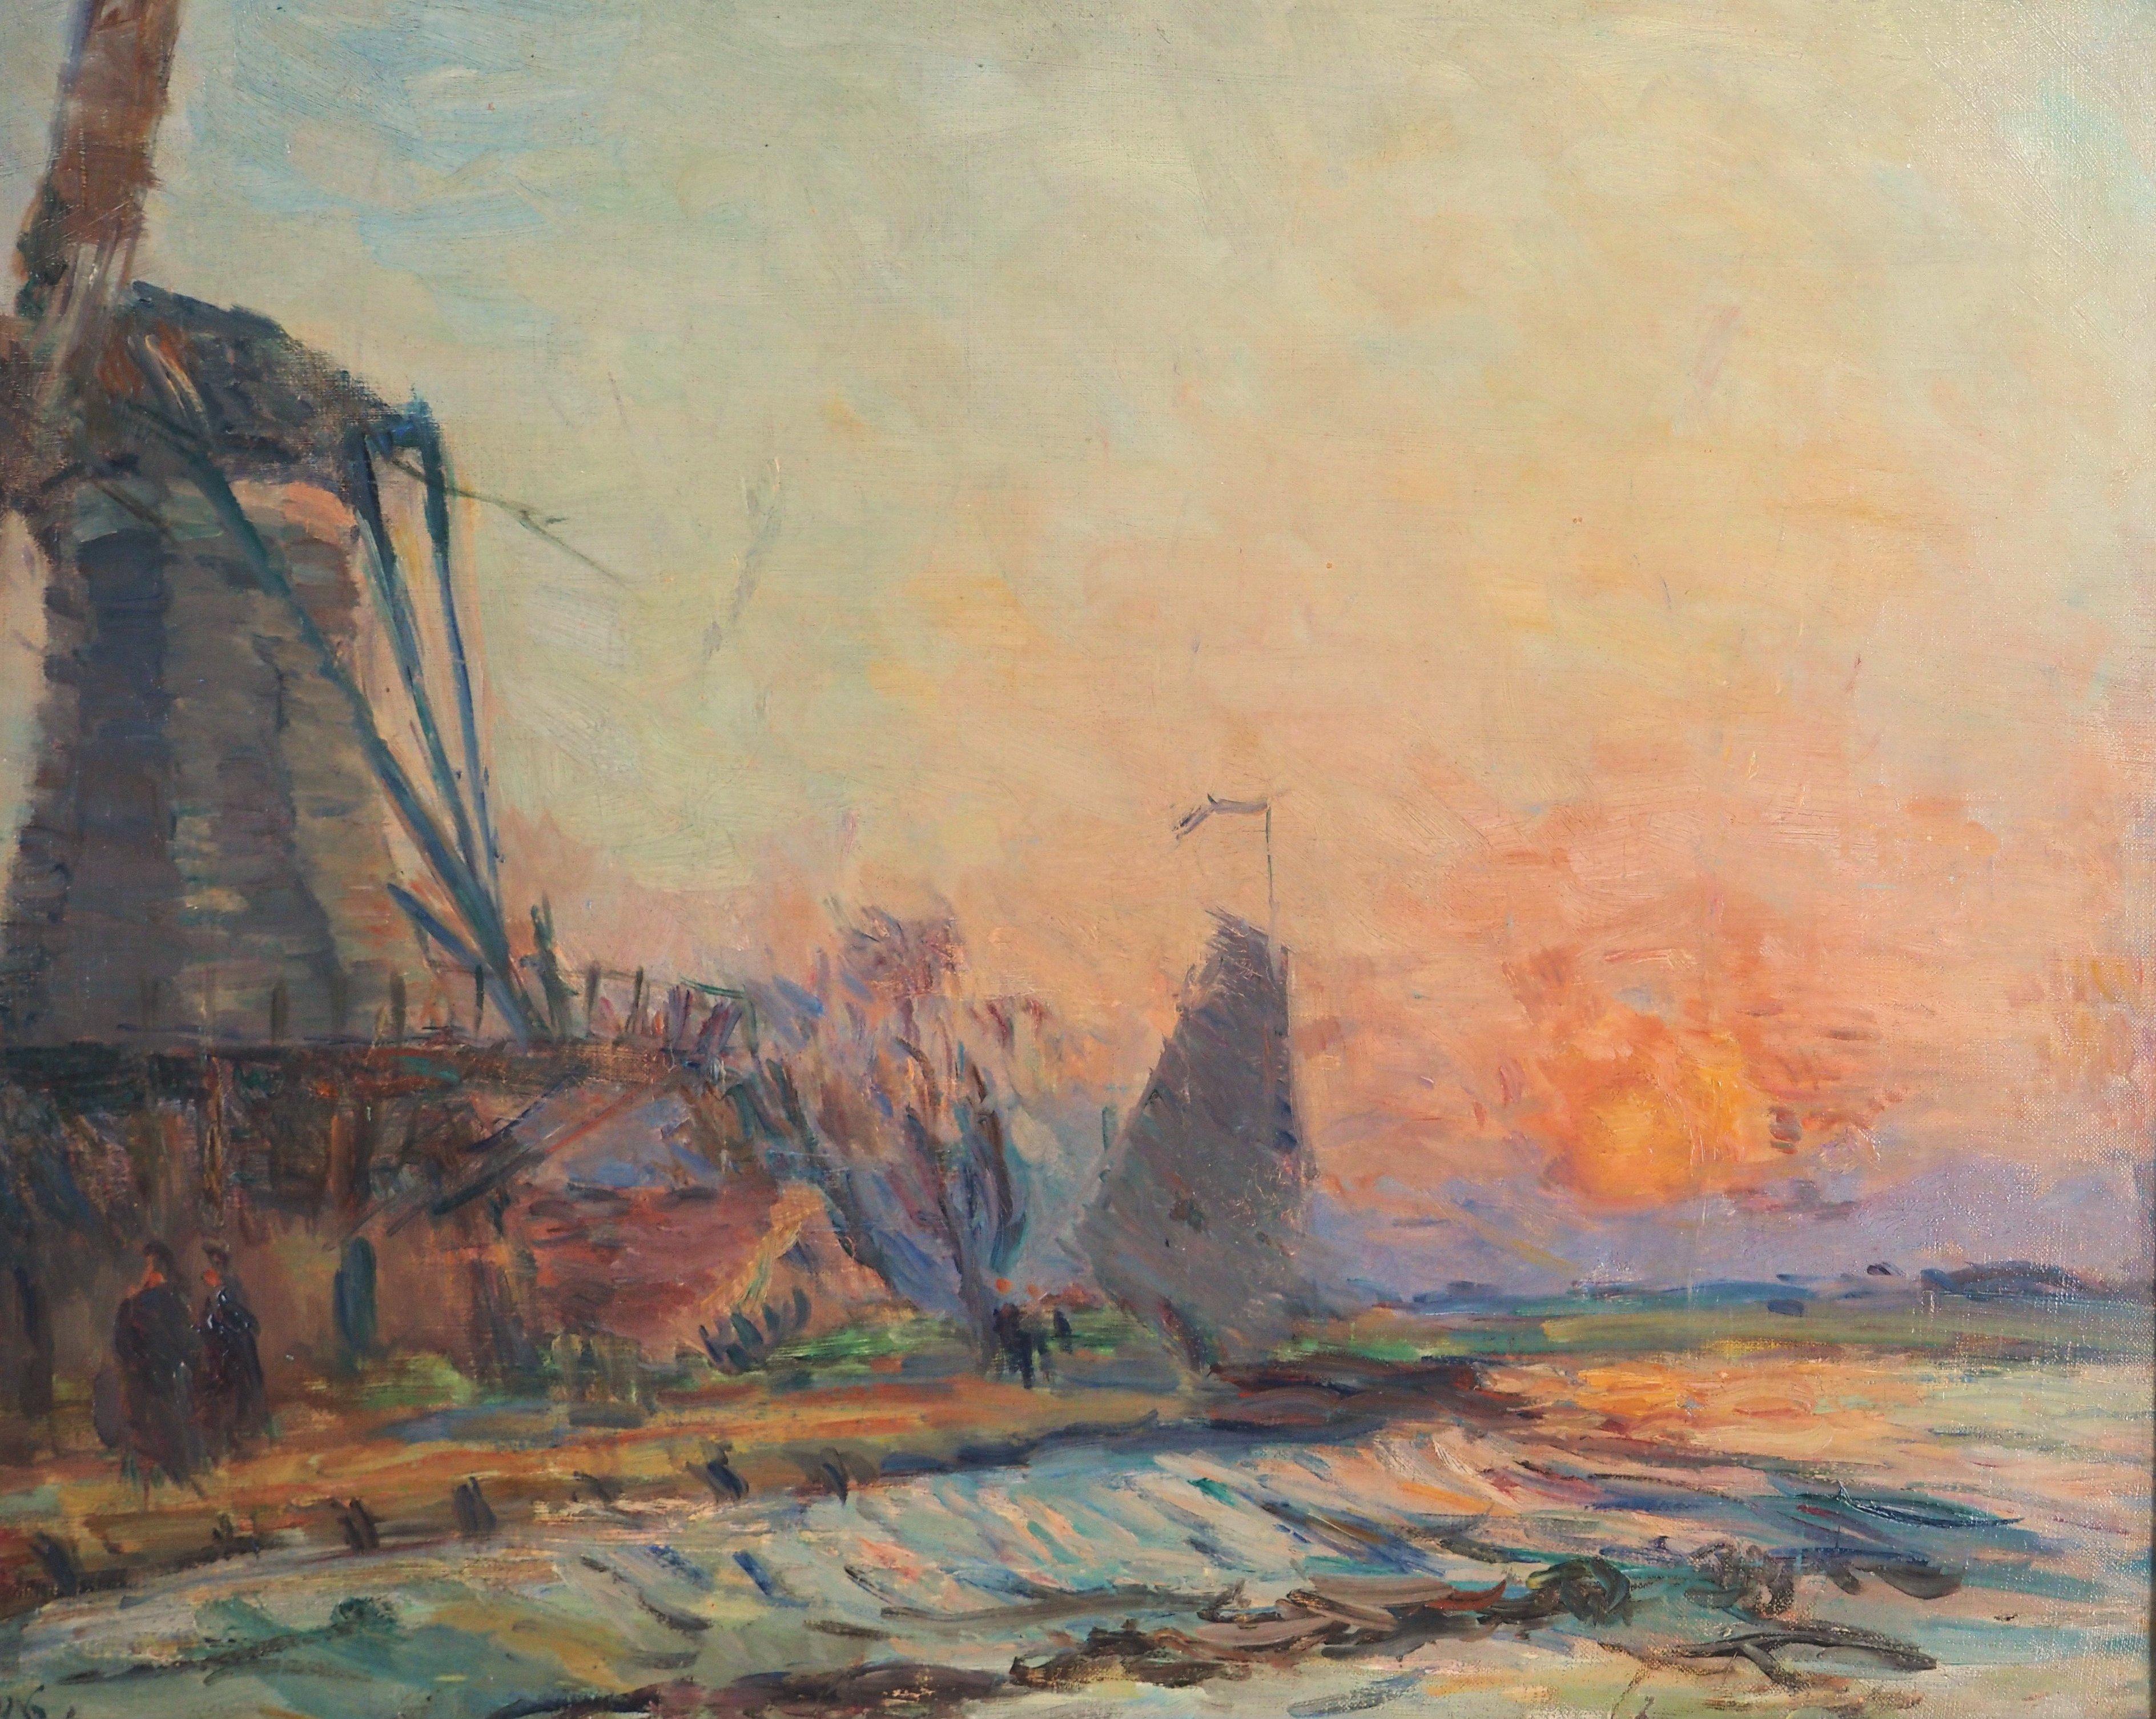 Holland : Windmill and Sunset near Rotterdam - Original Oil on Canvas, Signed - Impressionist Painting by Albert Lebourg